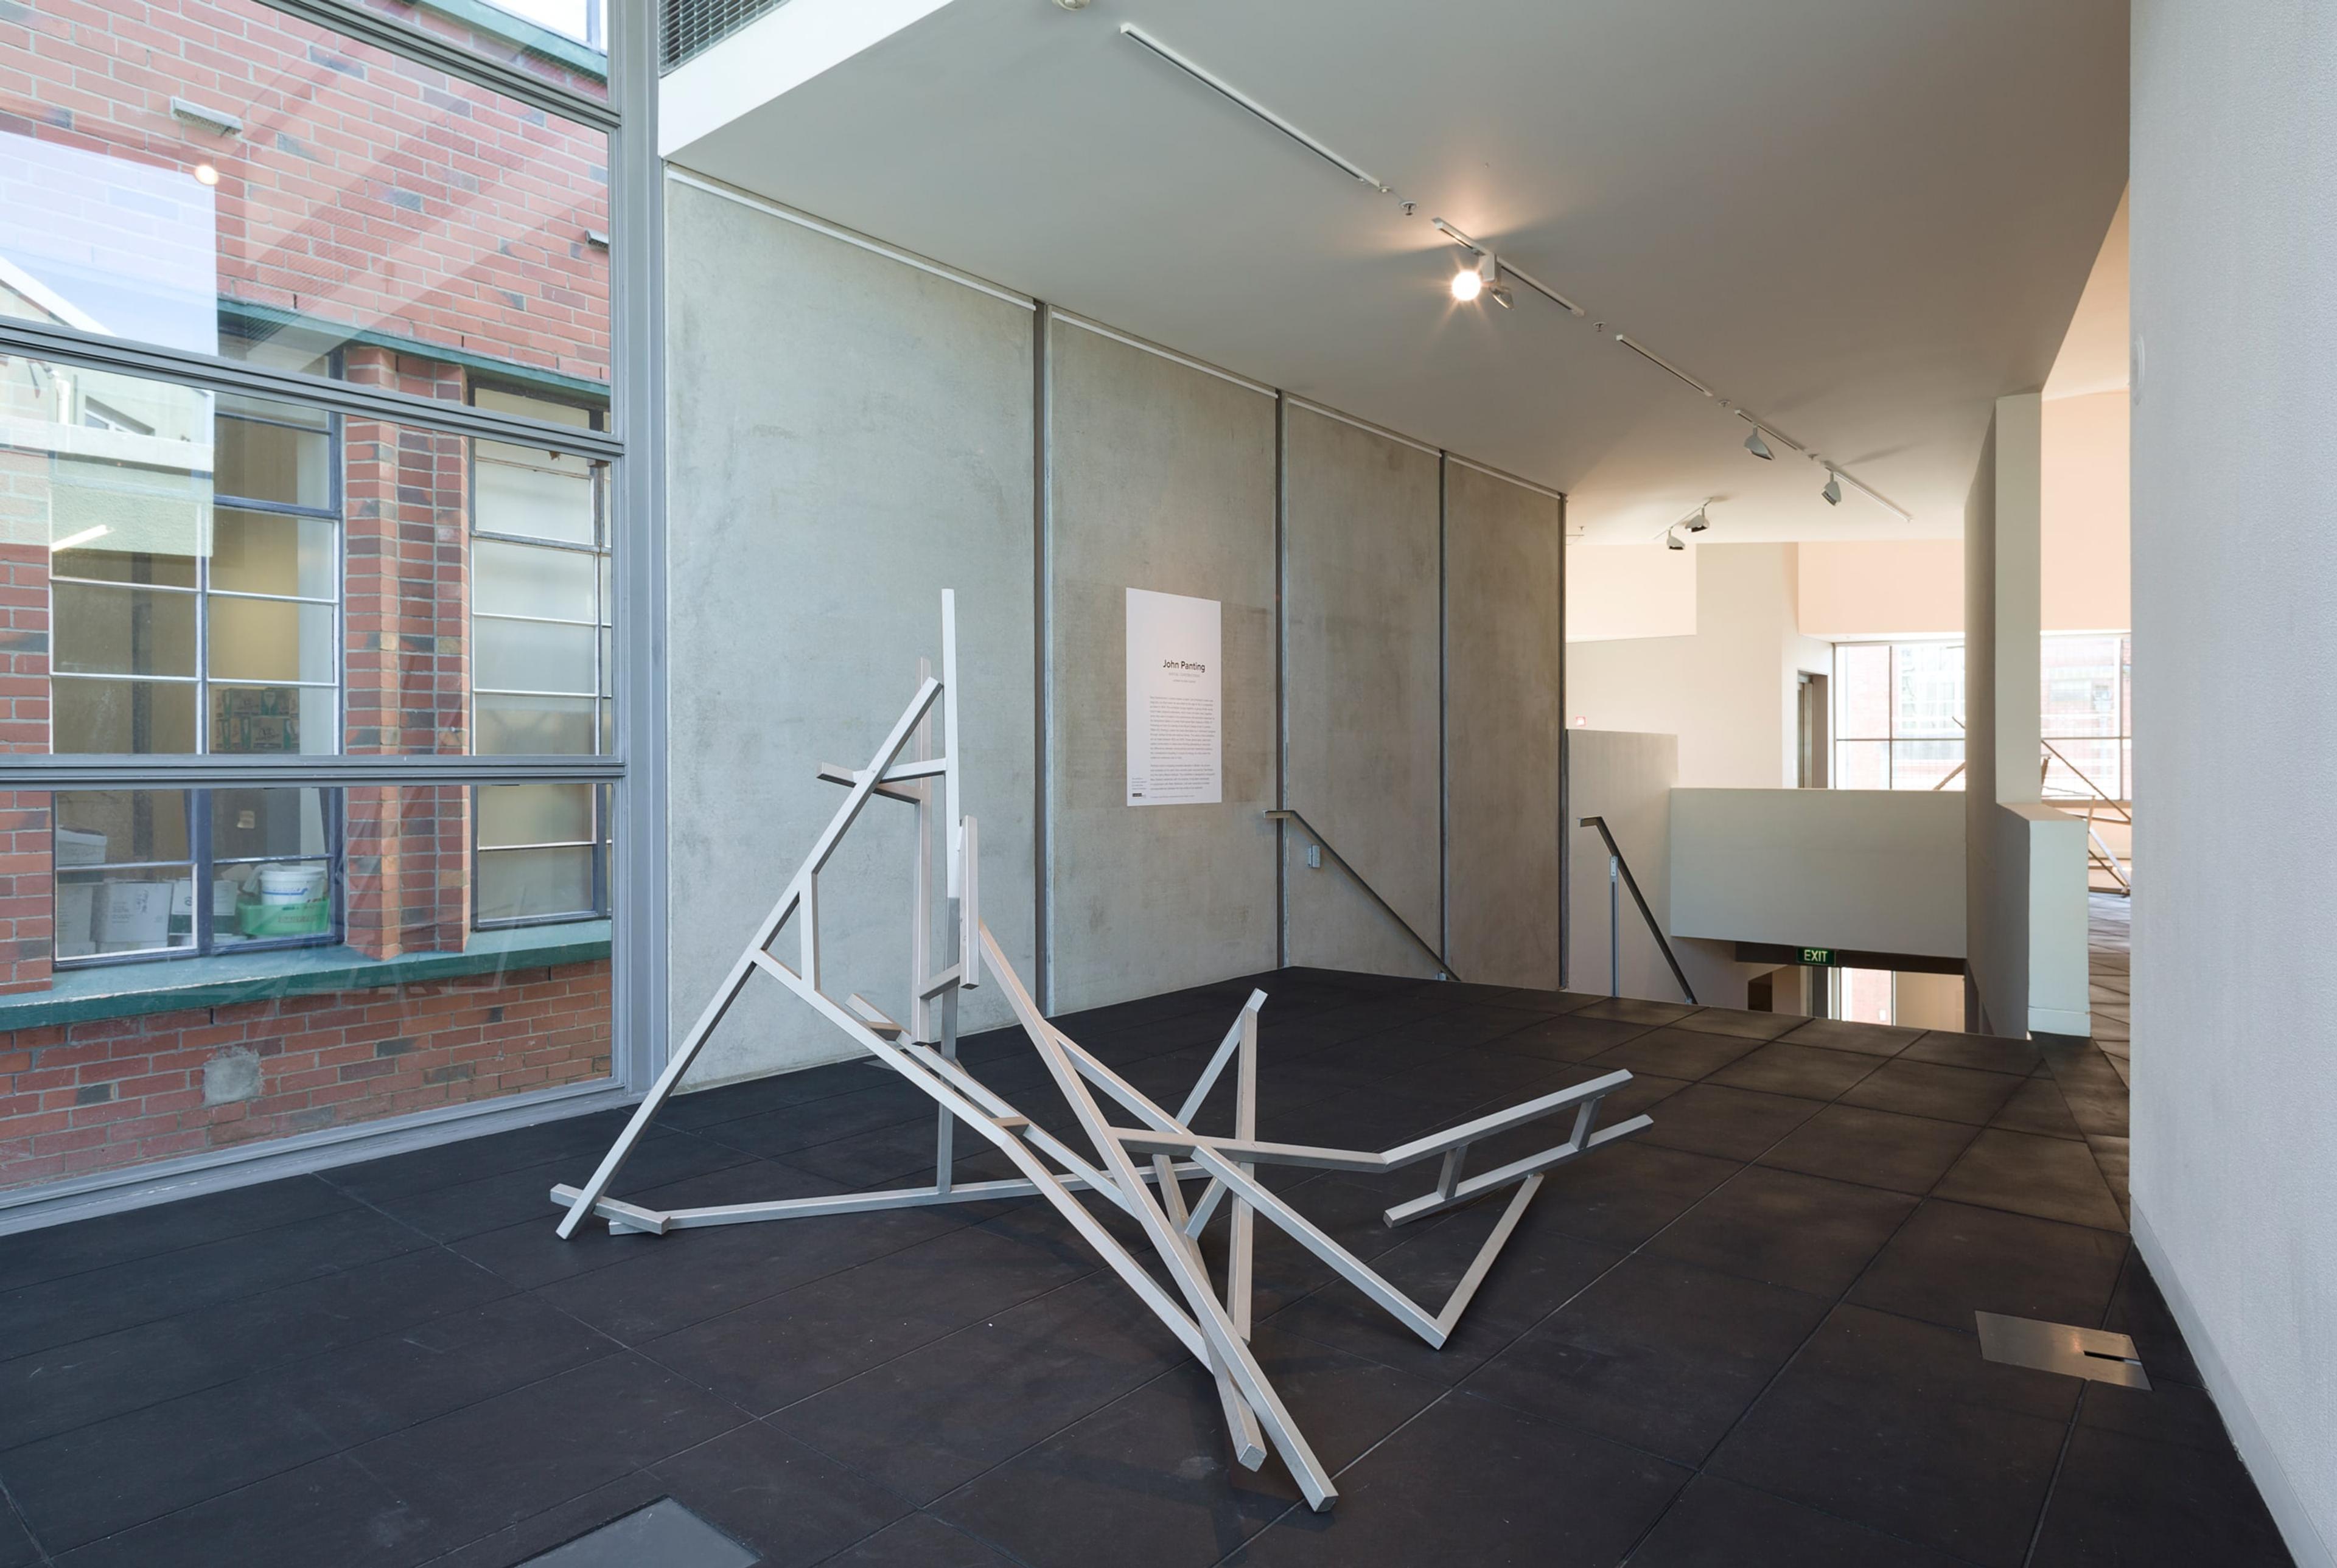 Installation view of John Panting: Spatial Constructions at the Adam Art Gallery, showing 5.12 (Untitled V) , 1972–73, steel, 183 x 305 x 152cm. Collection of Christchurch Art Gallery Te Puna o Waiwhetu. Photo: Shaun Waugh